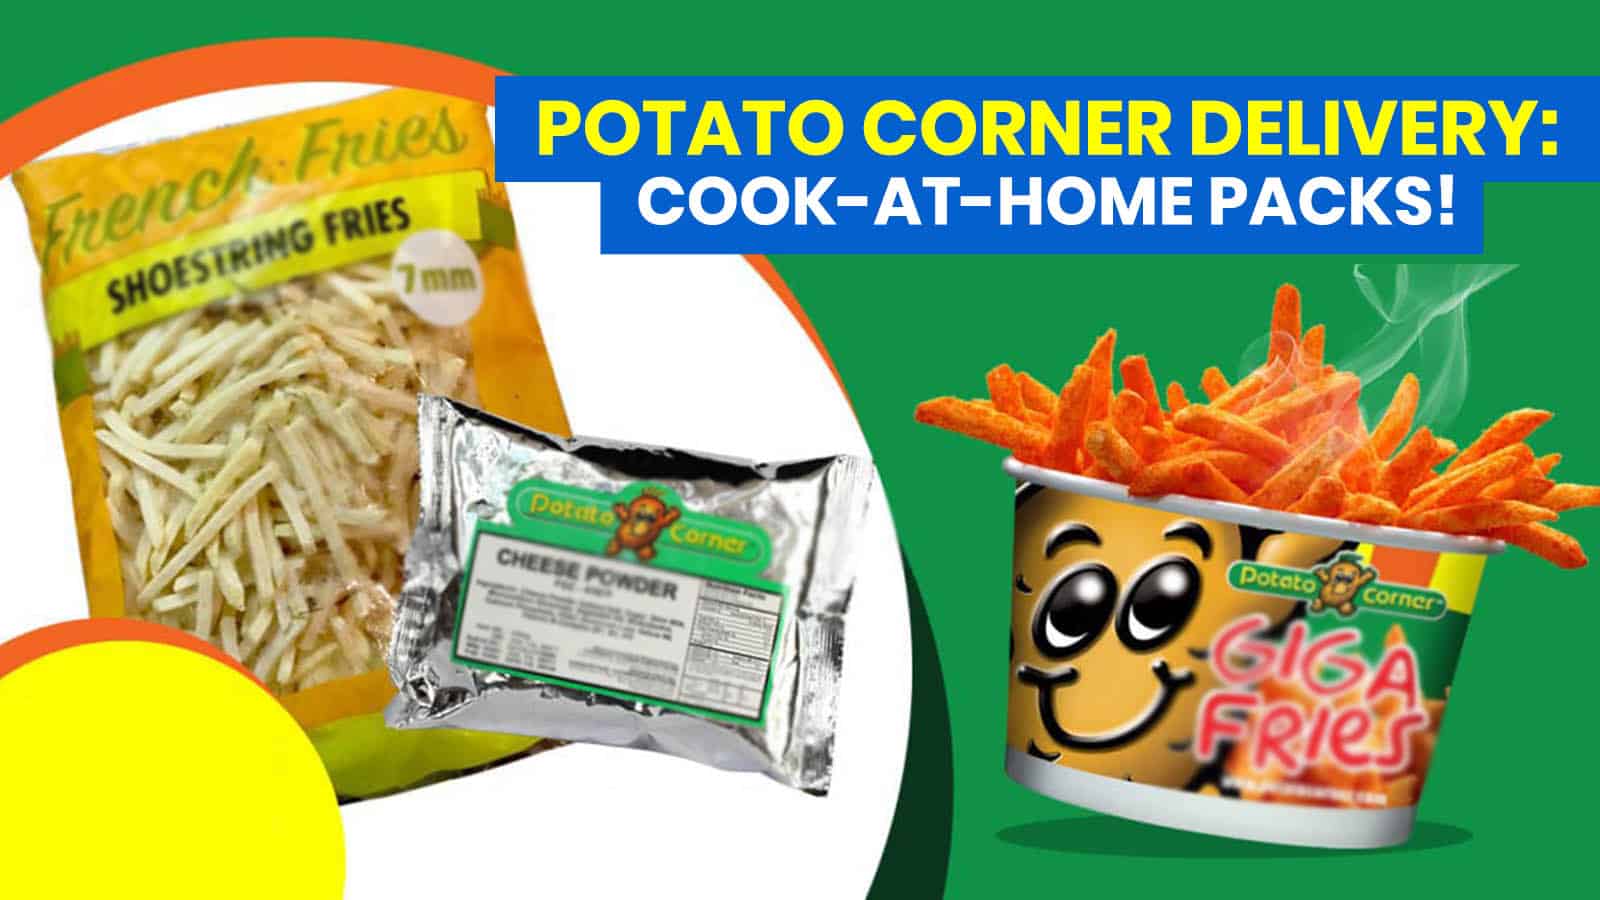 POTATO CORNER DELIVERY: How to Order Cook-at-Home Packs